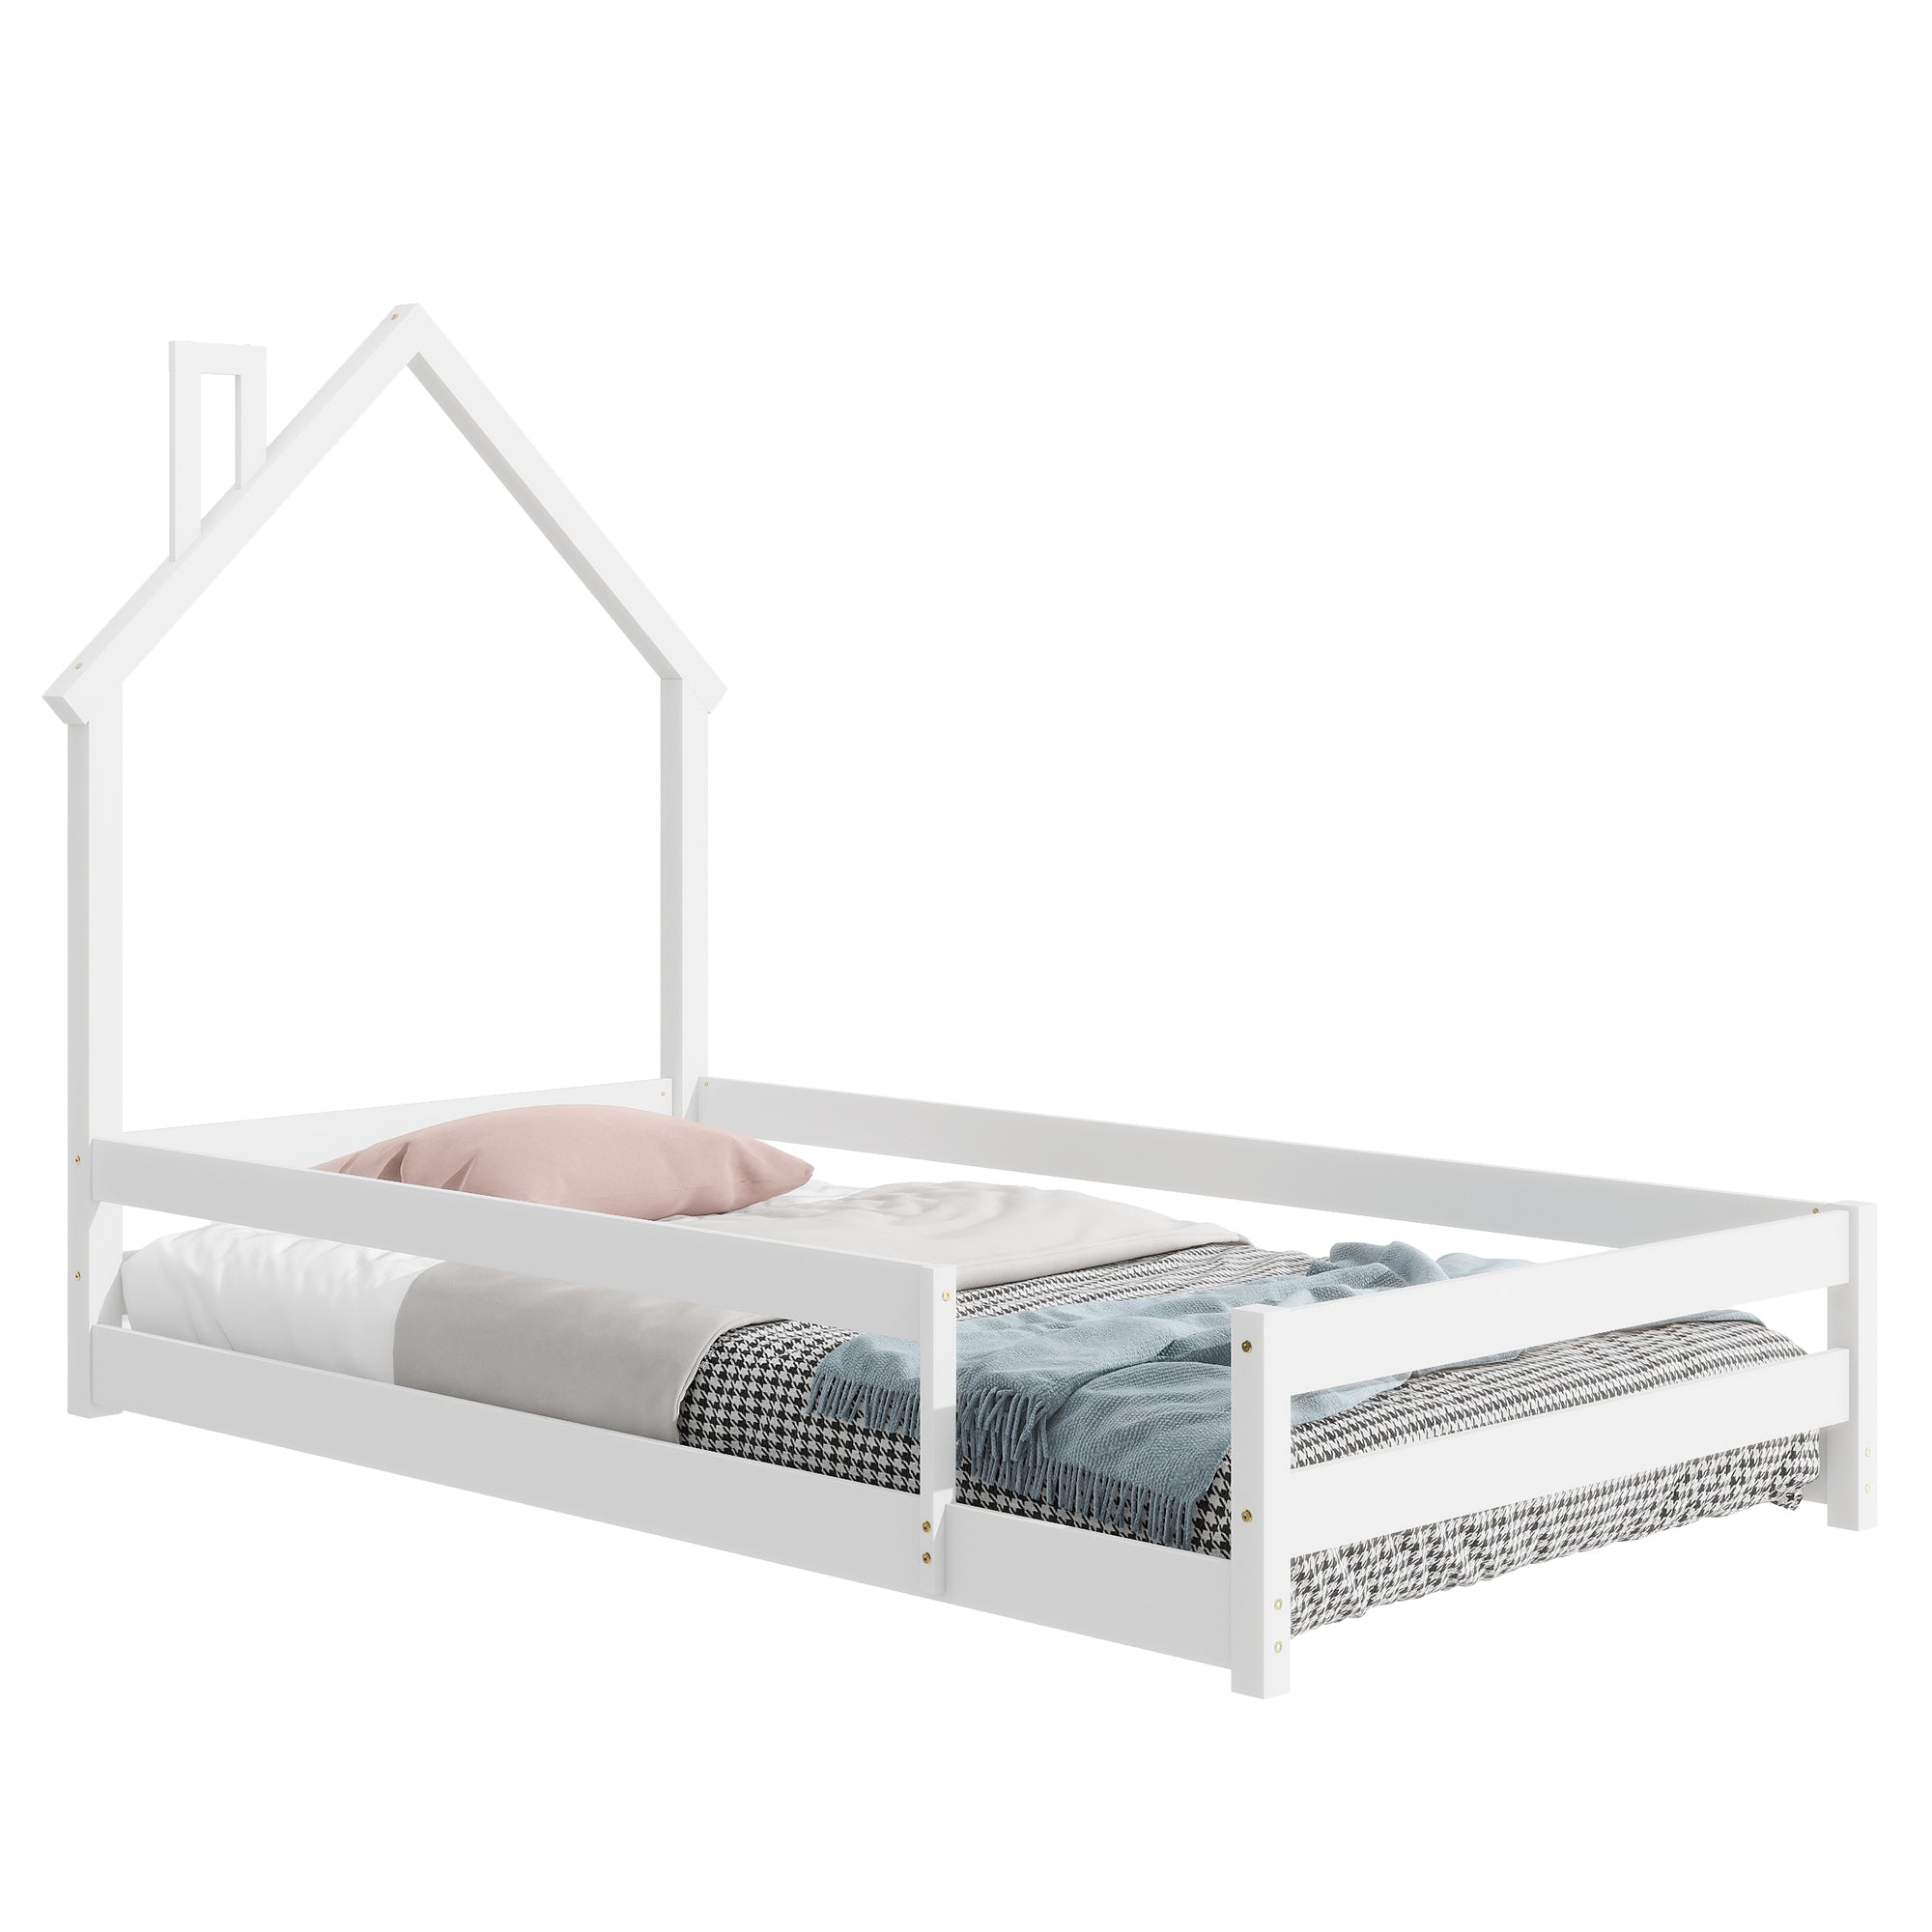 Twin Size Wood bed with House-shaped Headboard Floor bed with Fences,White